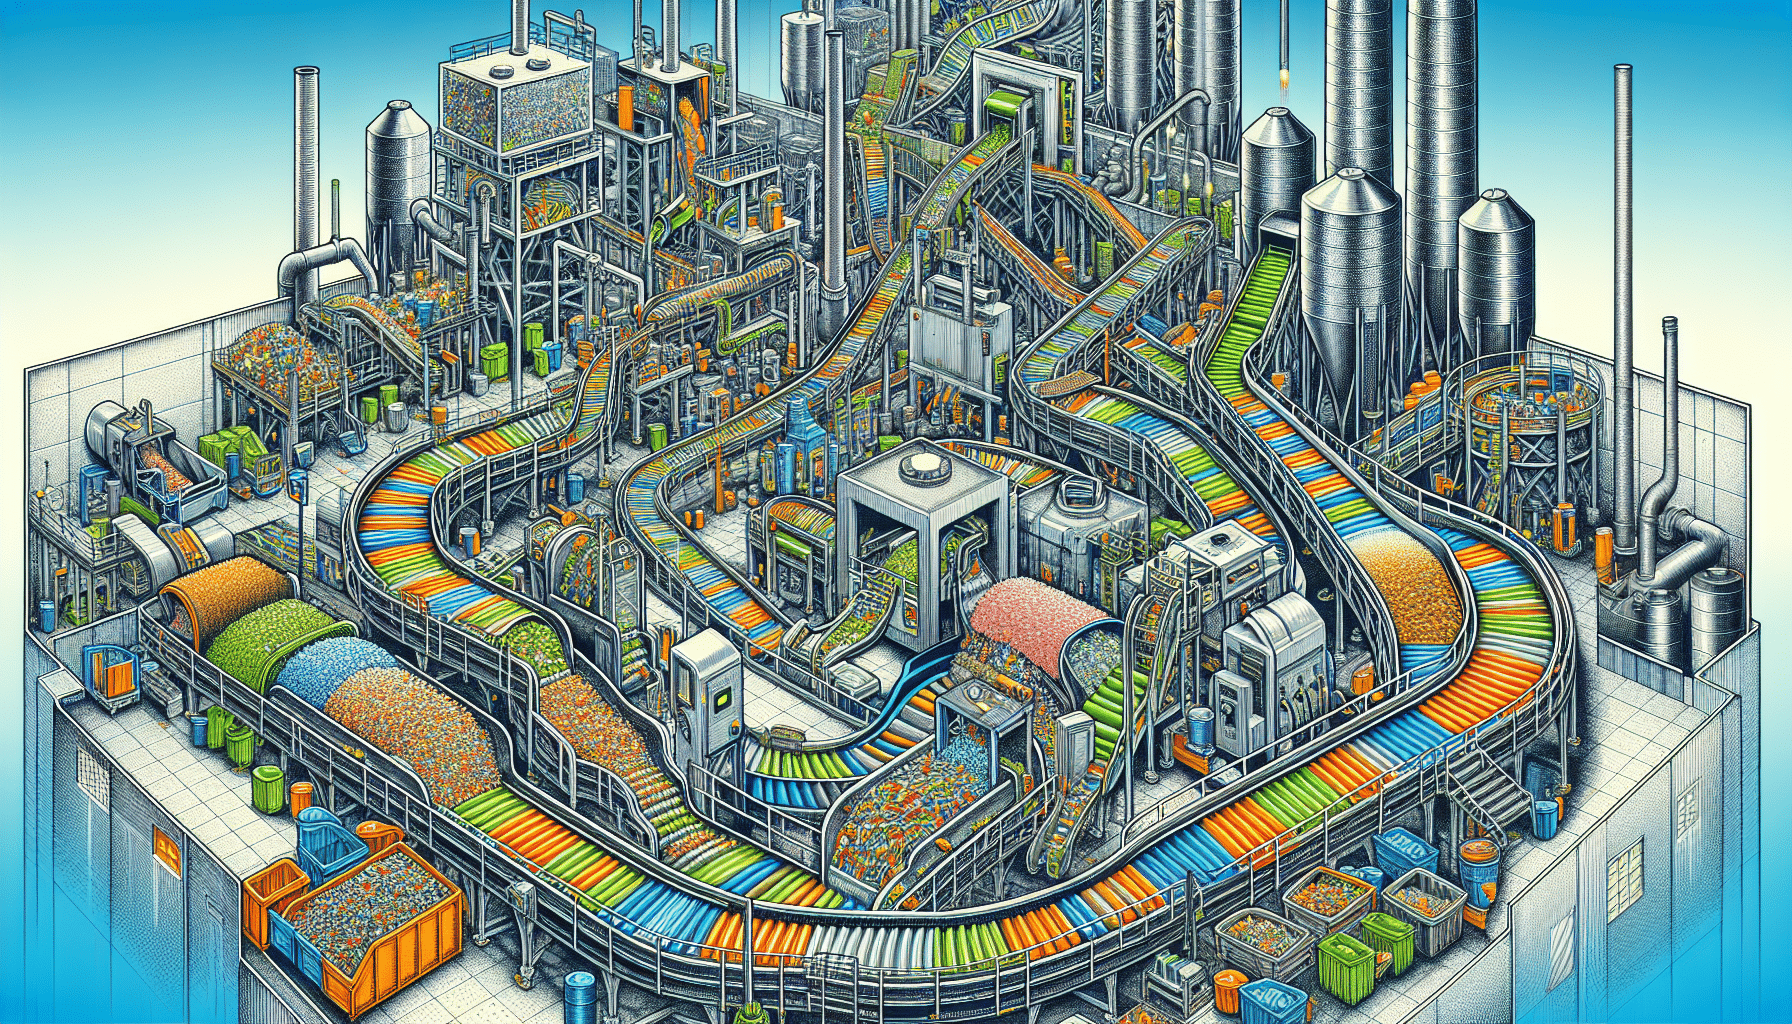 Illustration of a recycling plant with conveyor belts and sorting machinery